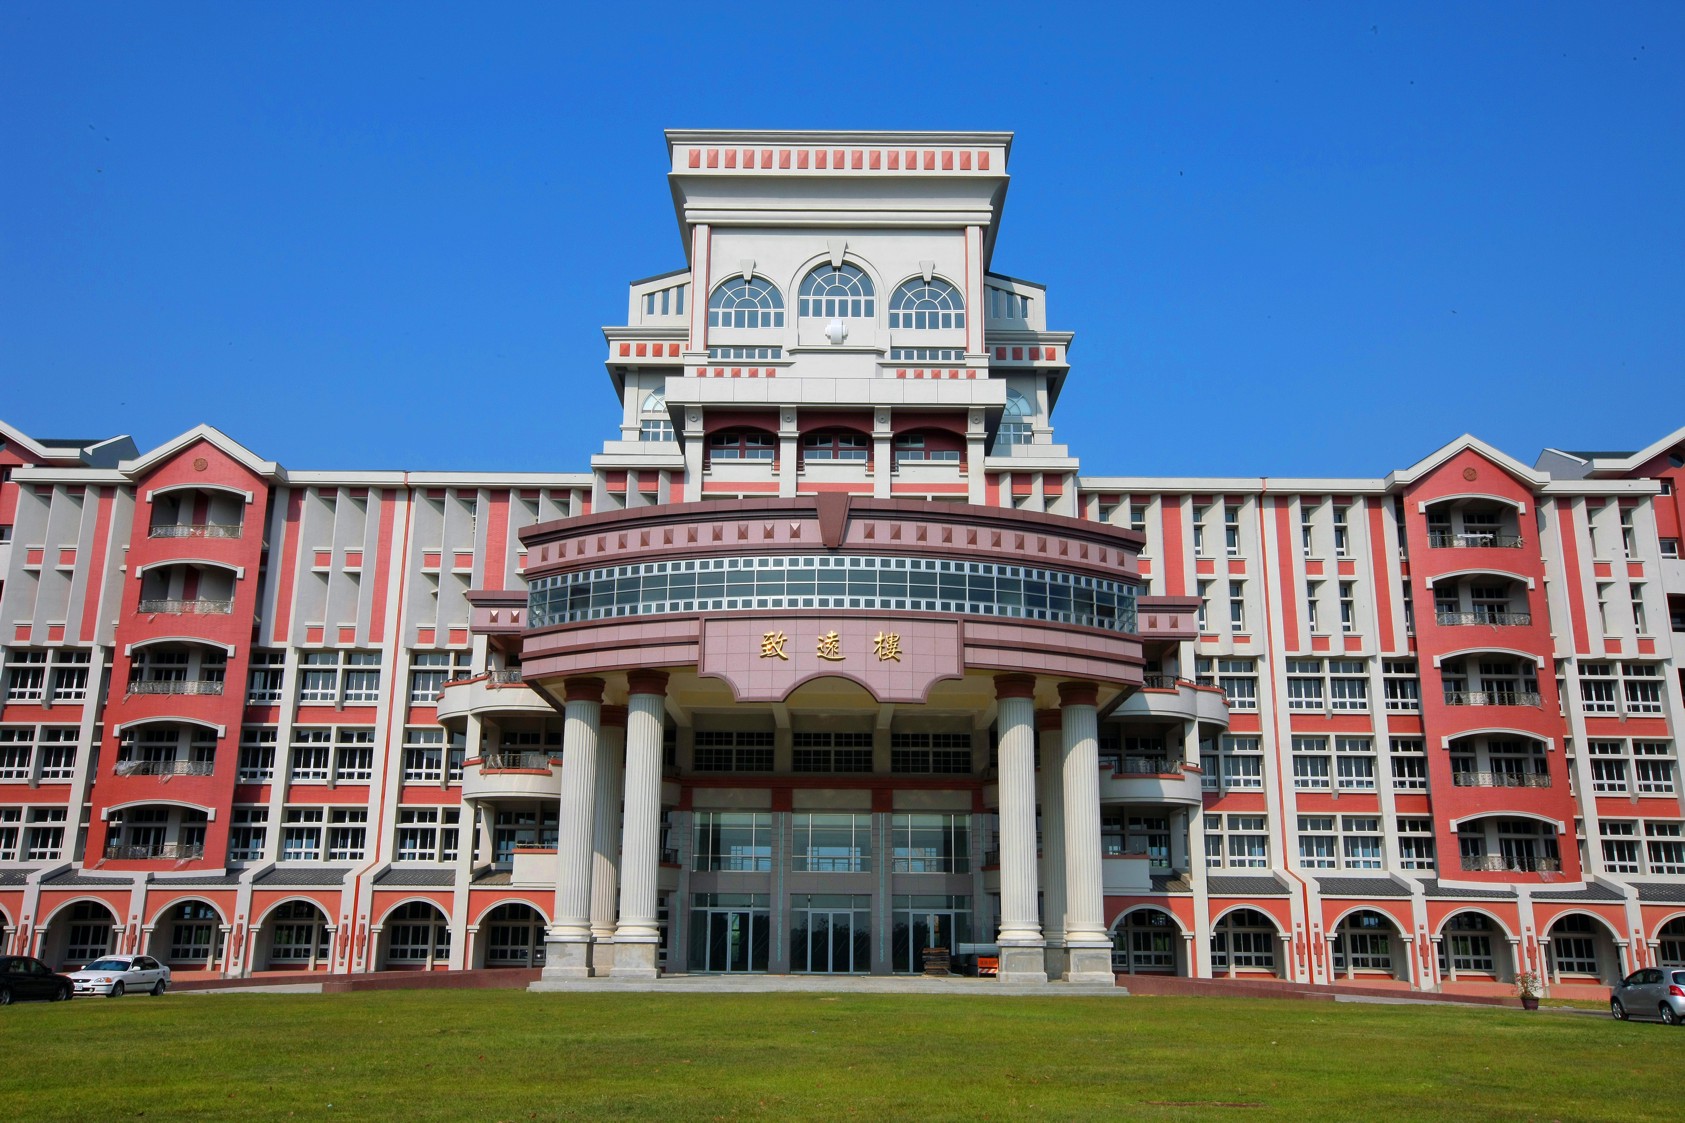 Zhiyuan Building (Front view of the building)